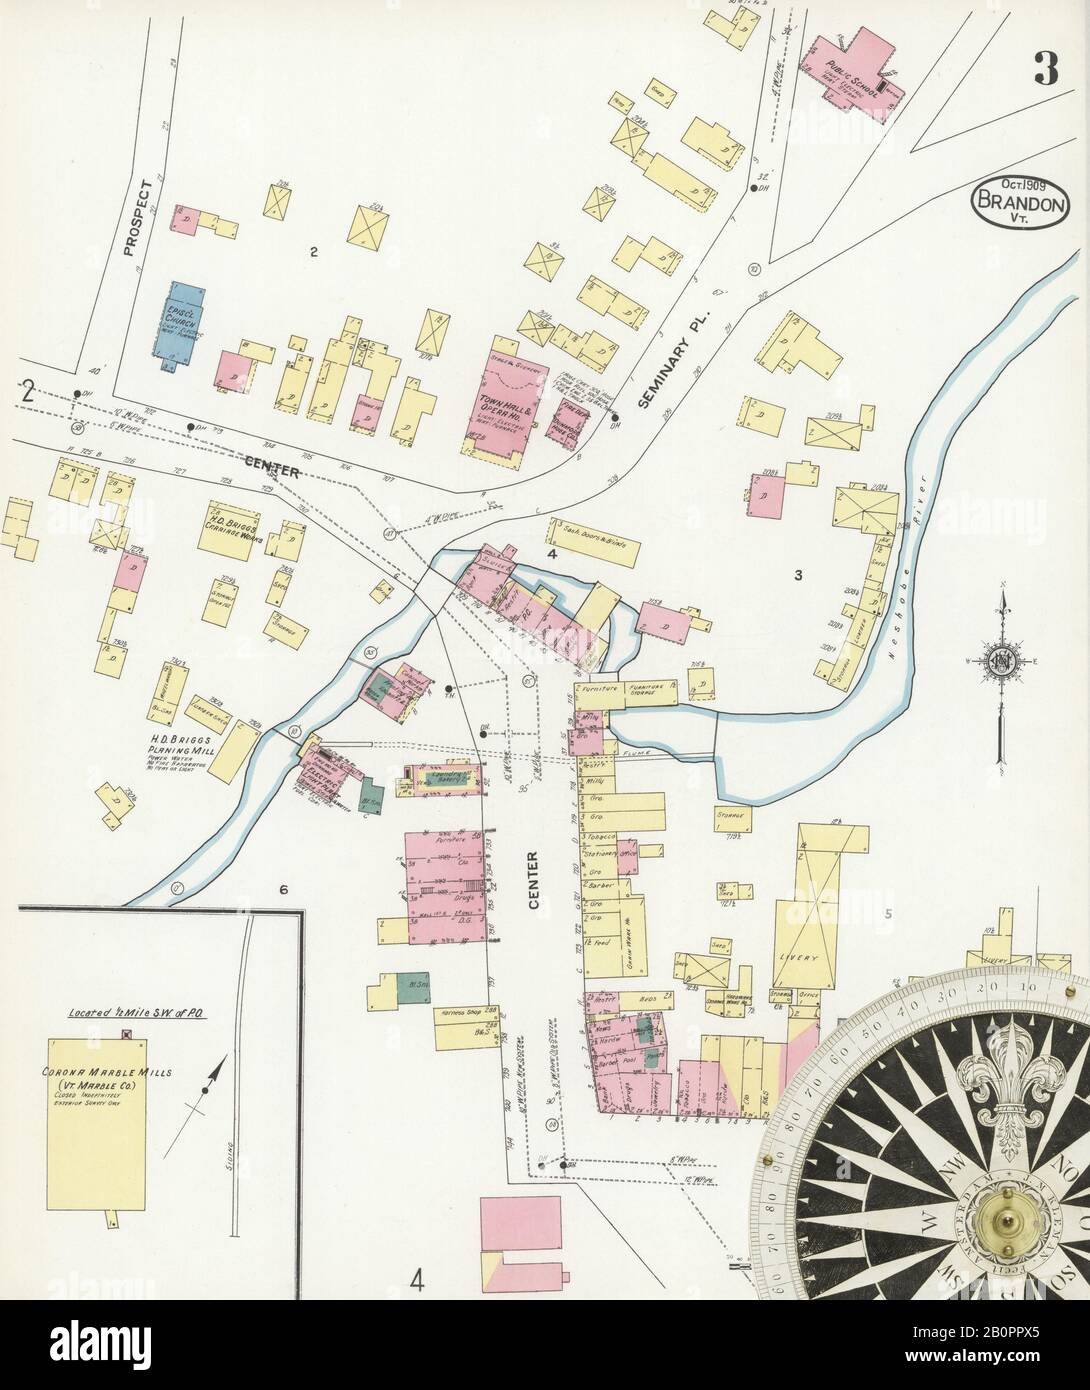 Image 3 of Sanborn Fire Insurance Map from Brandon, Rutland County, Vermont. Oct 1909. 6 Sheet(s), America, street map with a Nineteenth Century compass Stock Photo